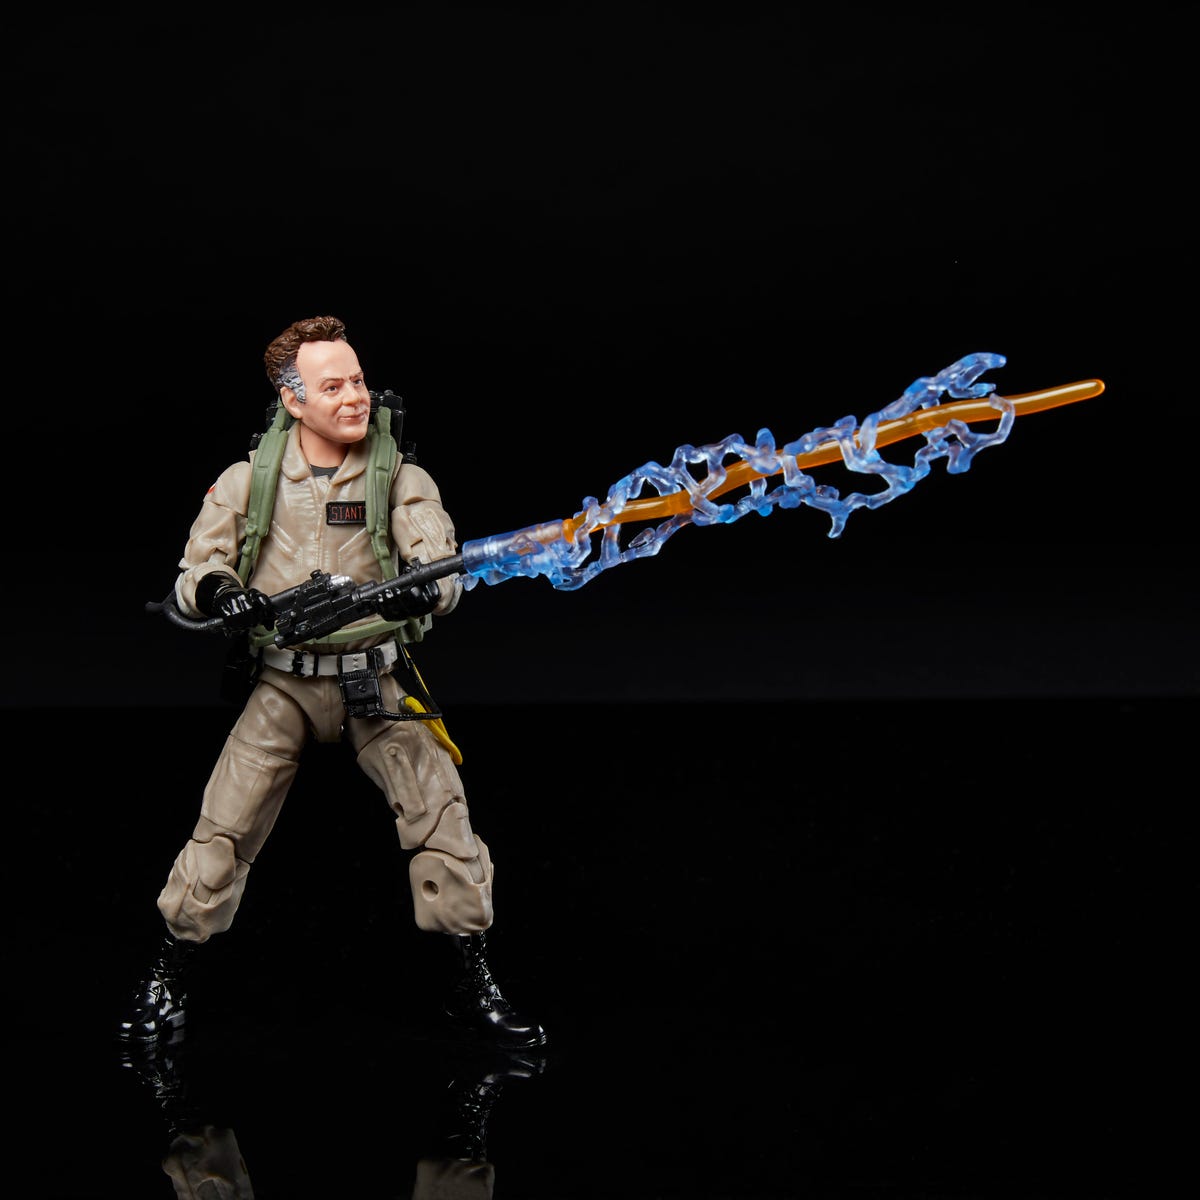 Ghostbusters action figures